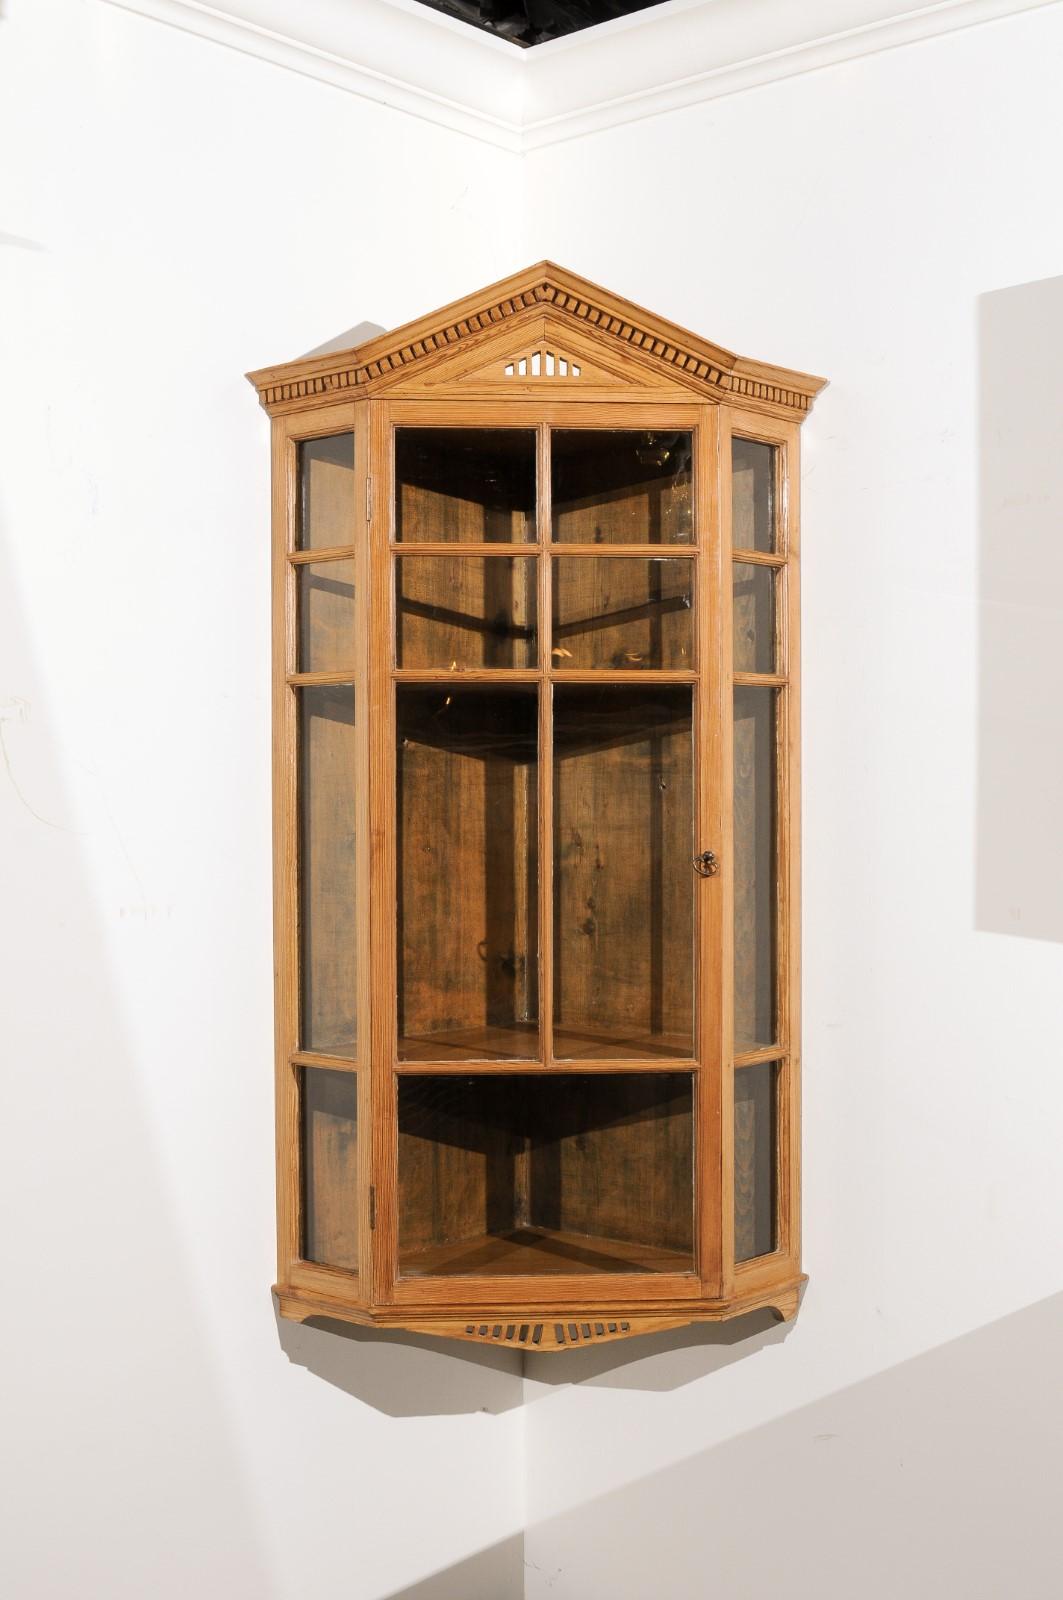 An English pine hanging corner cabinet from the late 19th century, with pointed pediment, dentil molding, glass doors and canted corners. Created in England during the third quarter of the 19th century, this pine wall hanging corner cabinet captures